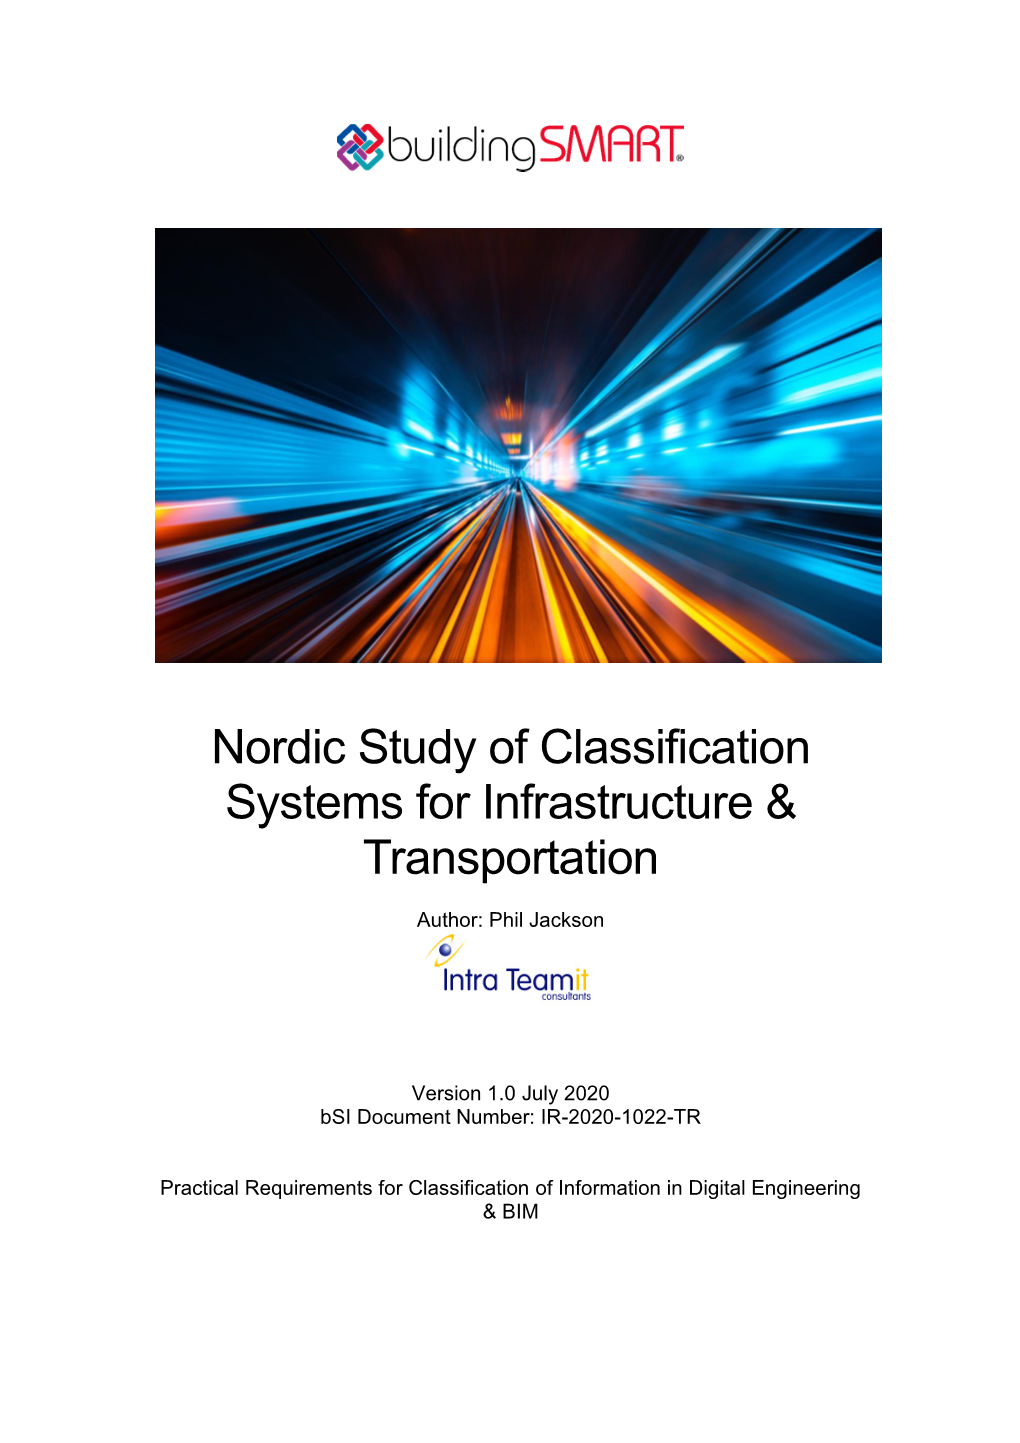 Nordic Study of Classification Systems for Infrastructure & Transportation